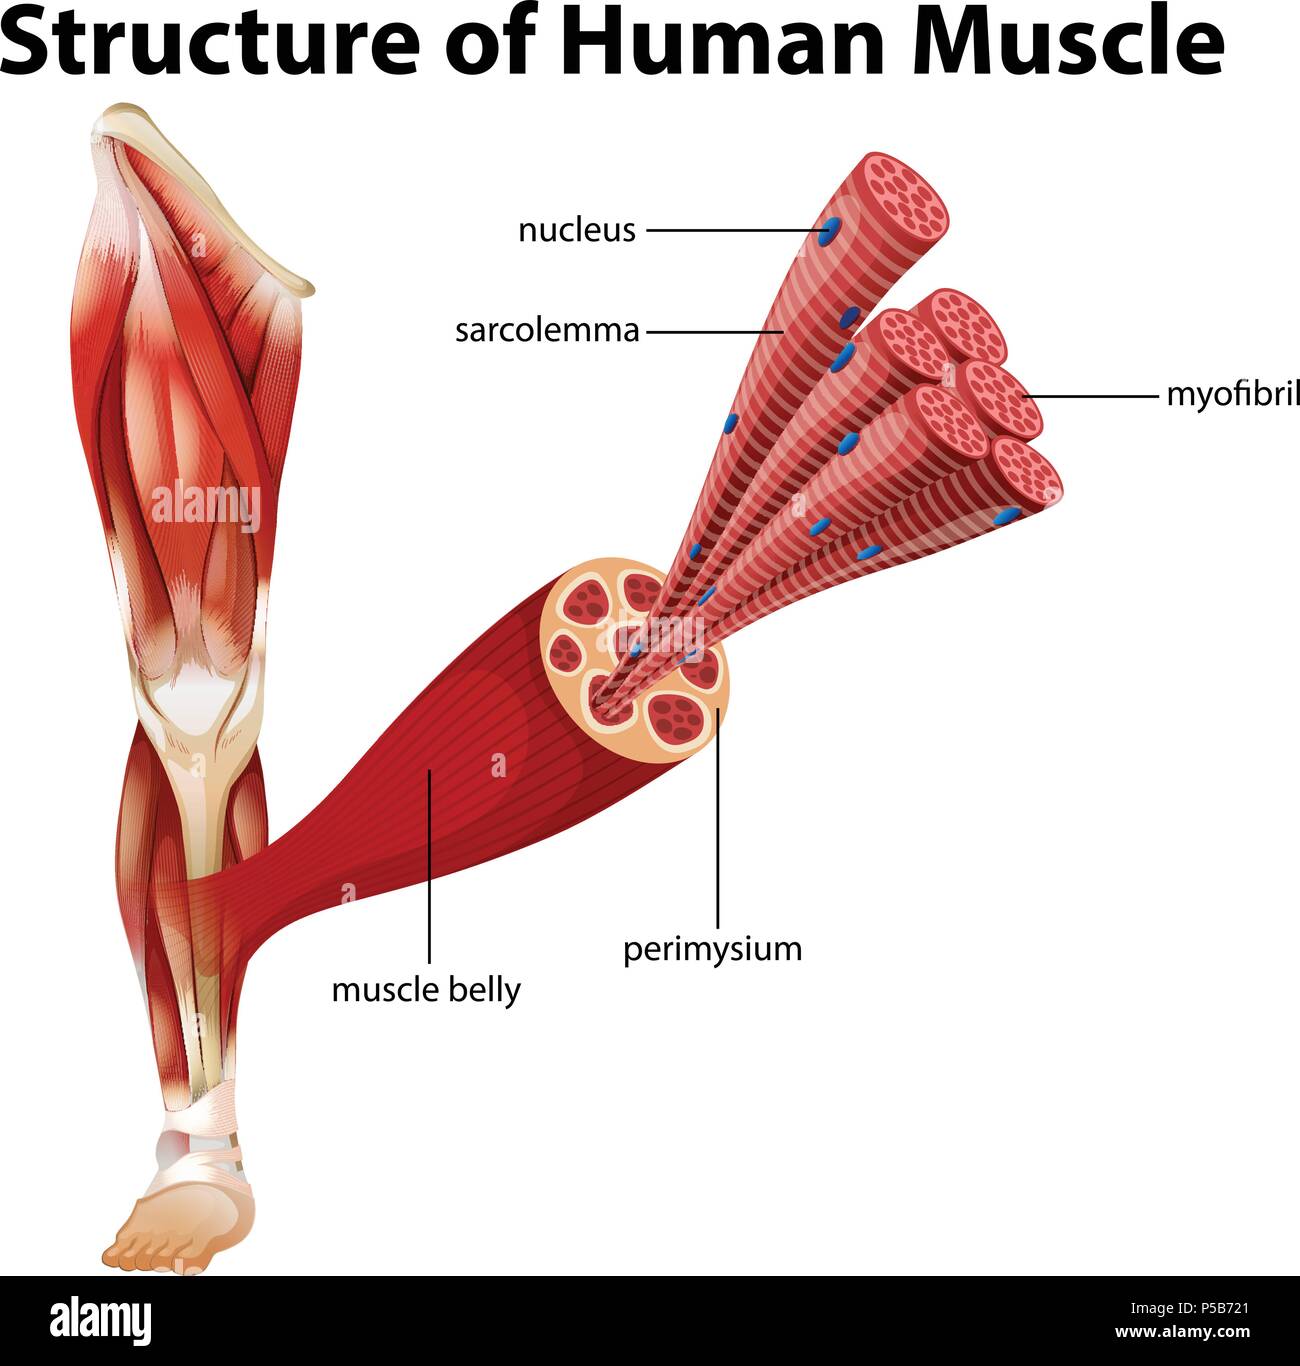 A Structure of Human Muscle illustration Stock Vector